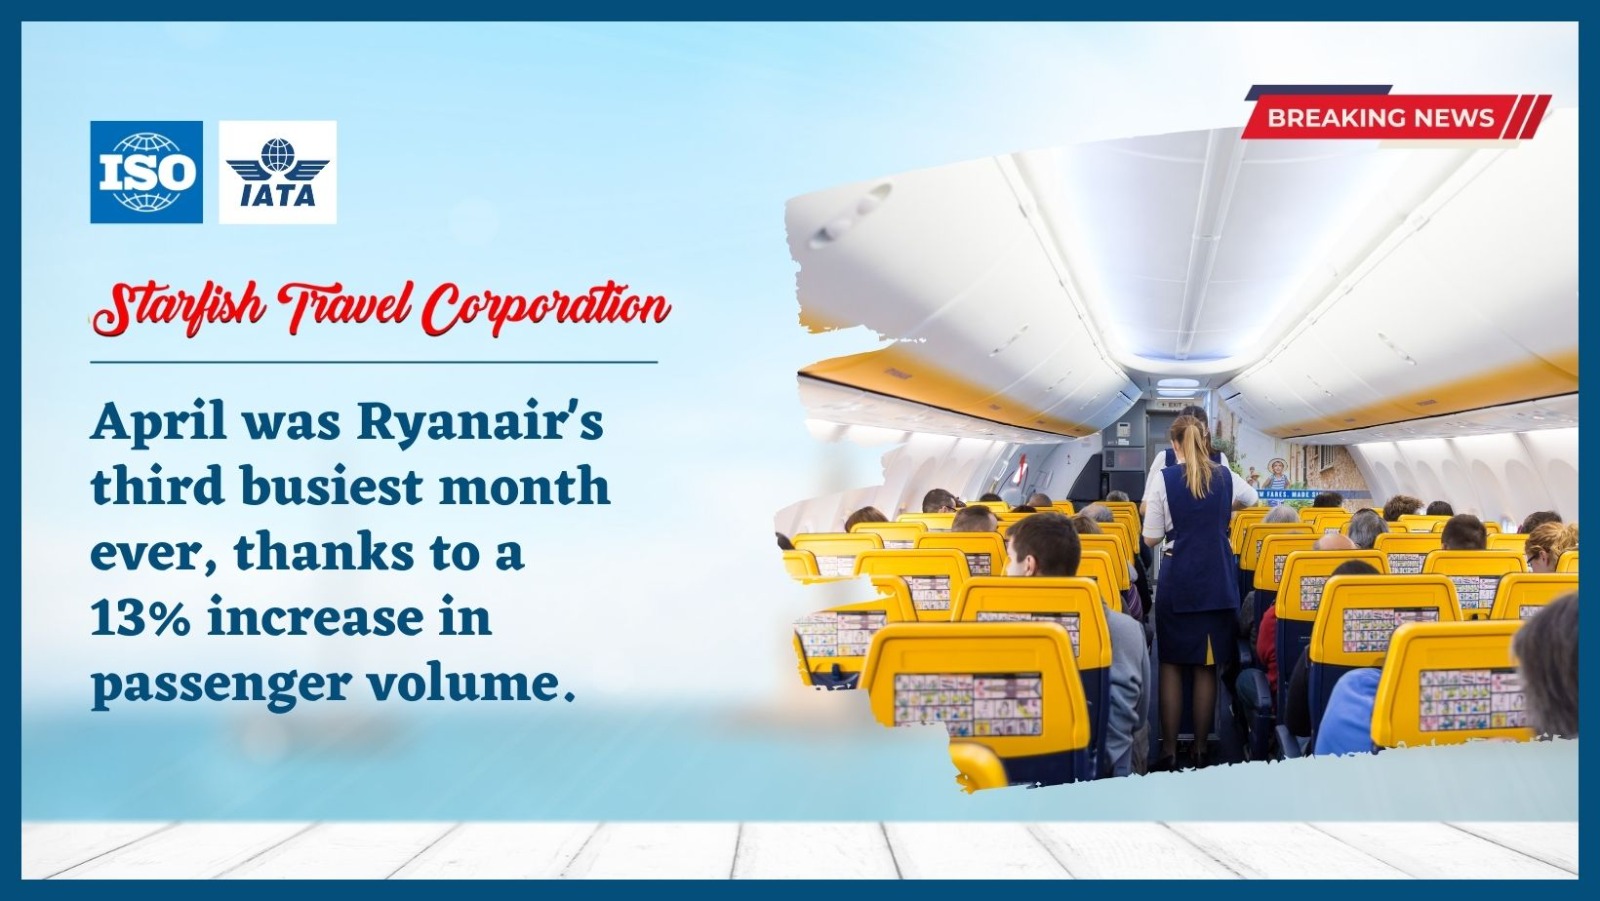 April was Ryanair's third busiest month ever, thanks to a 13% increase in passenger volume.